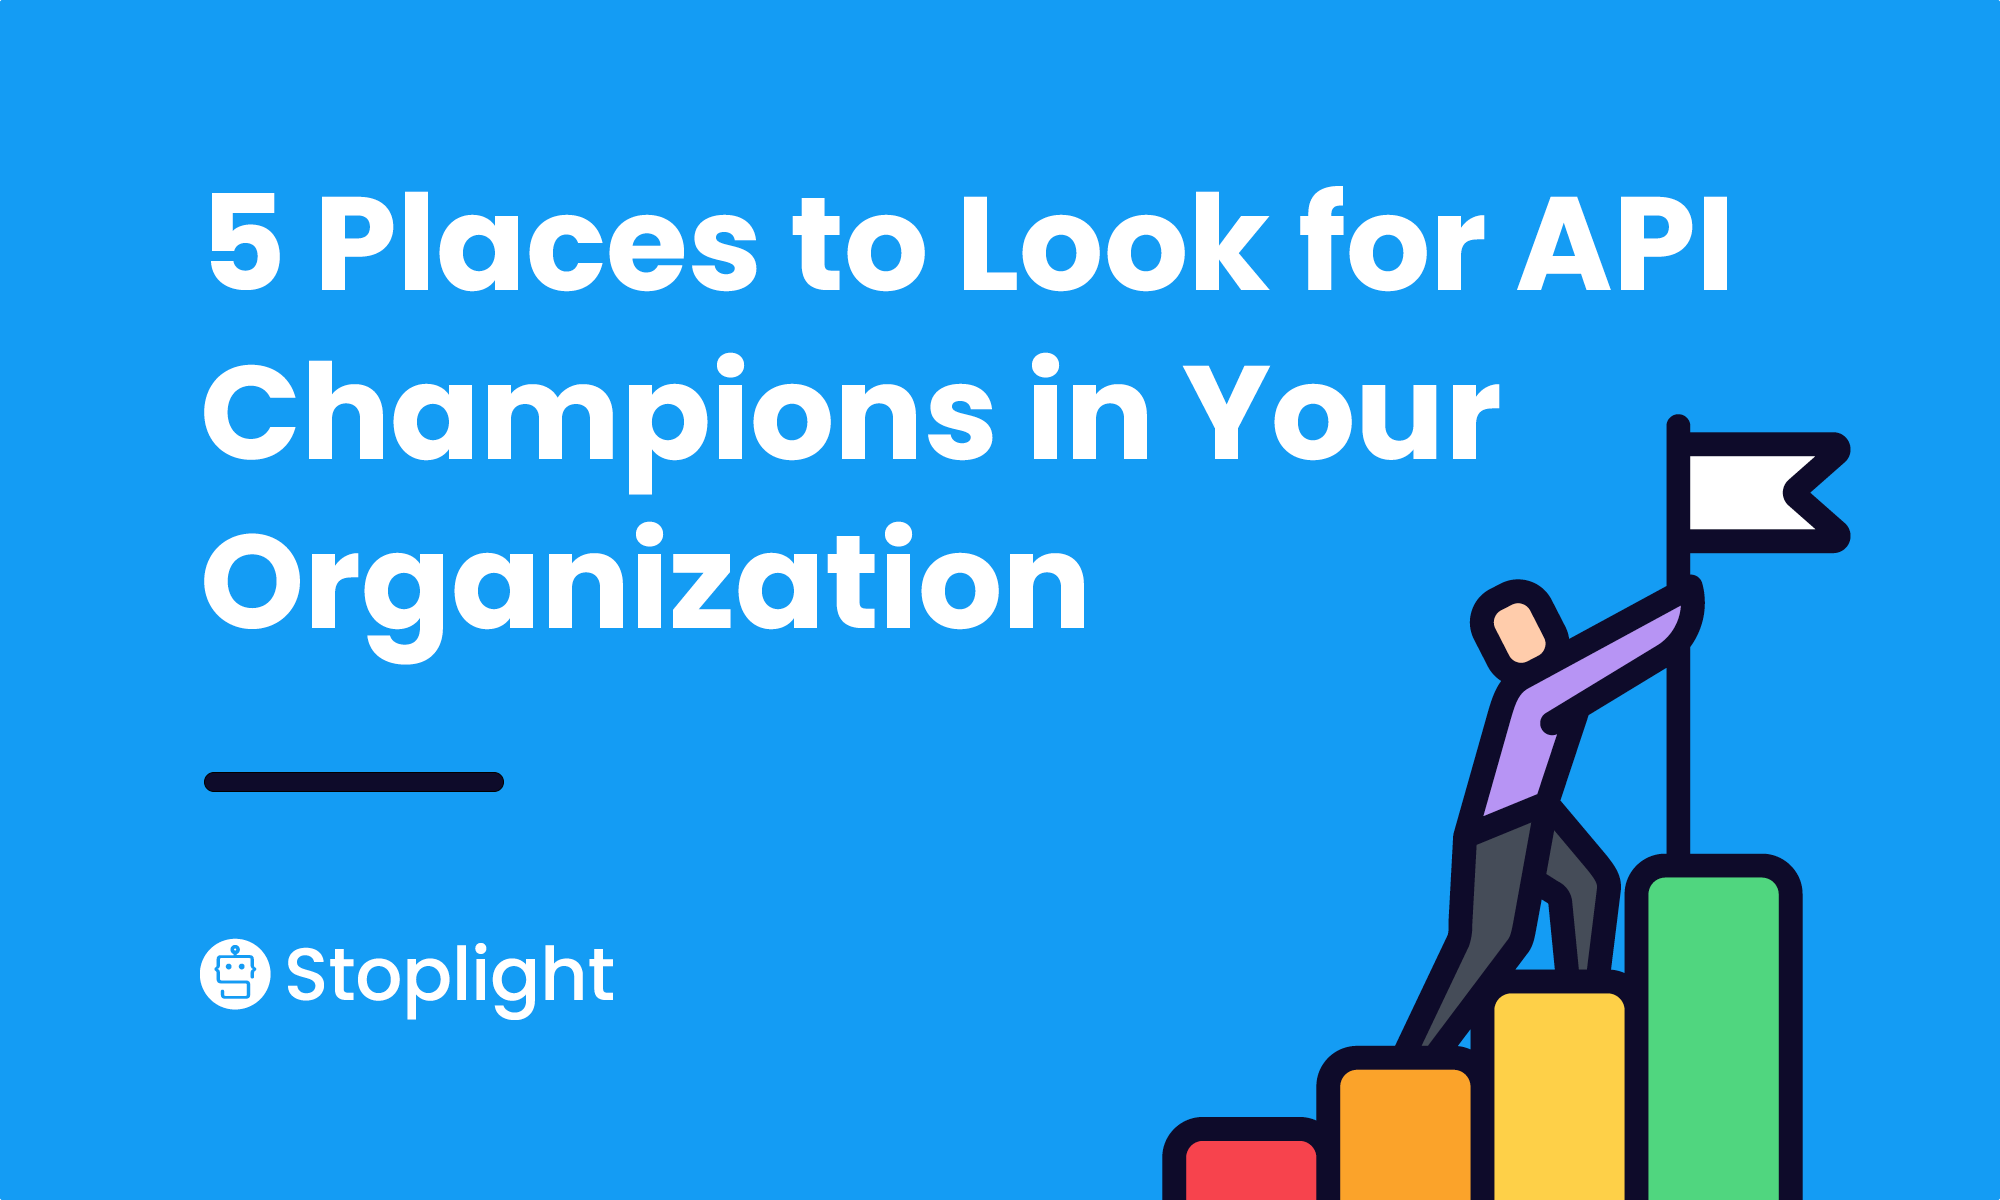 5 Places to Look for API Champions in Your Organization